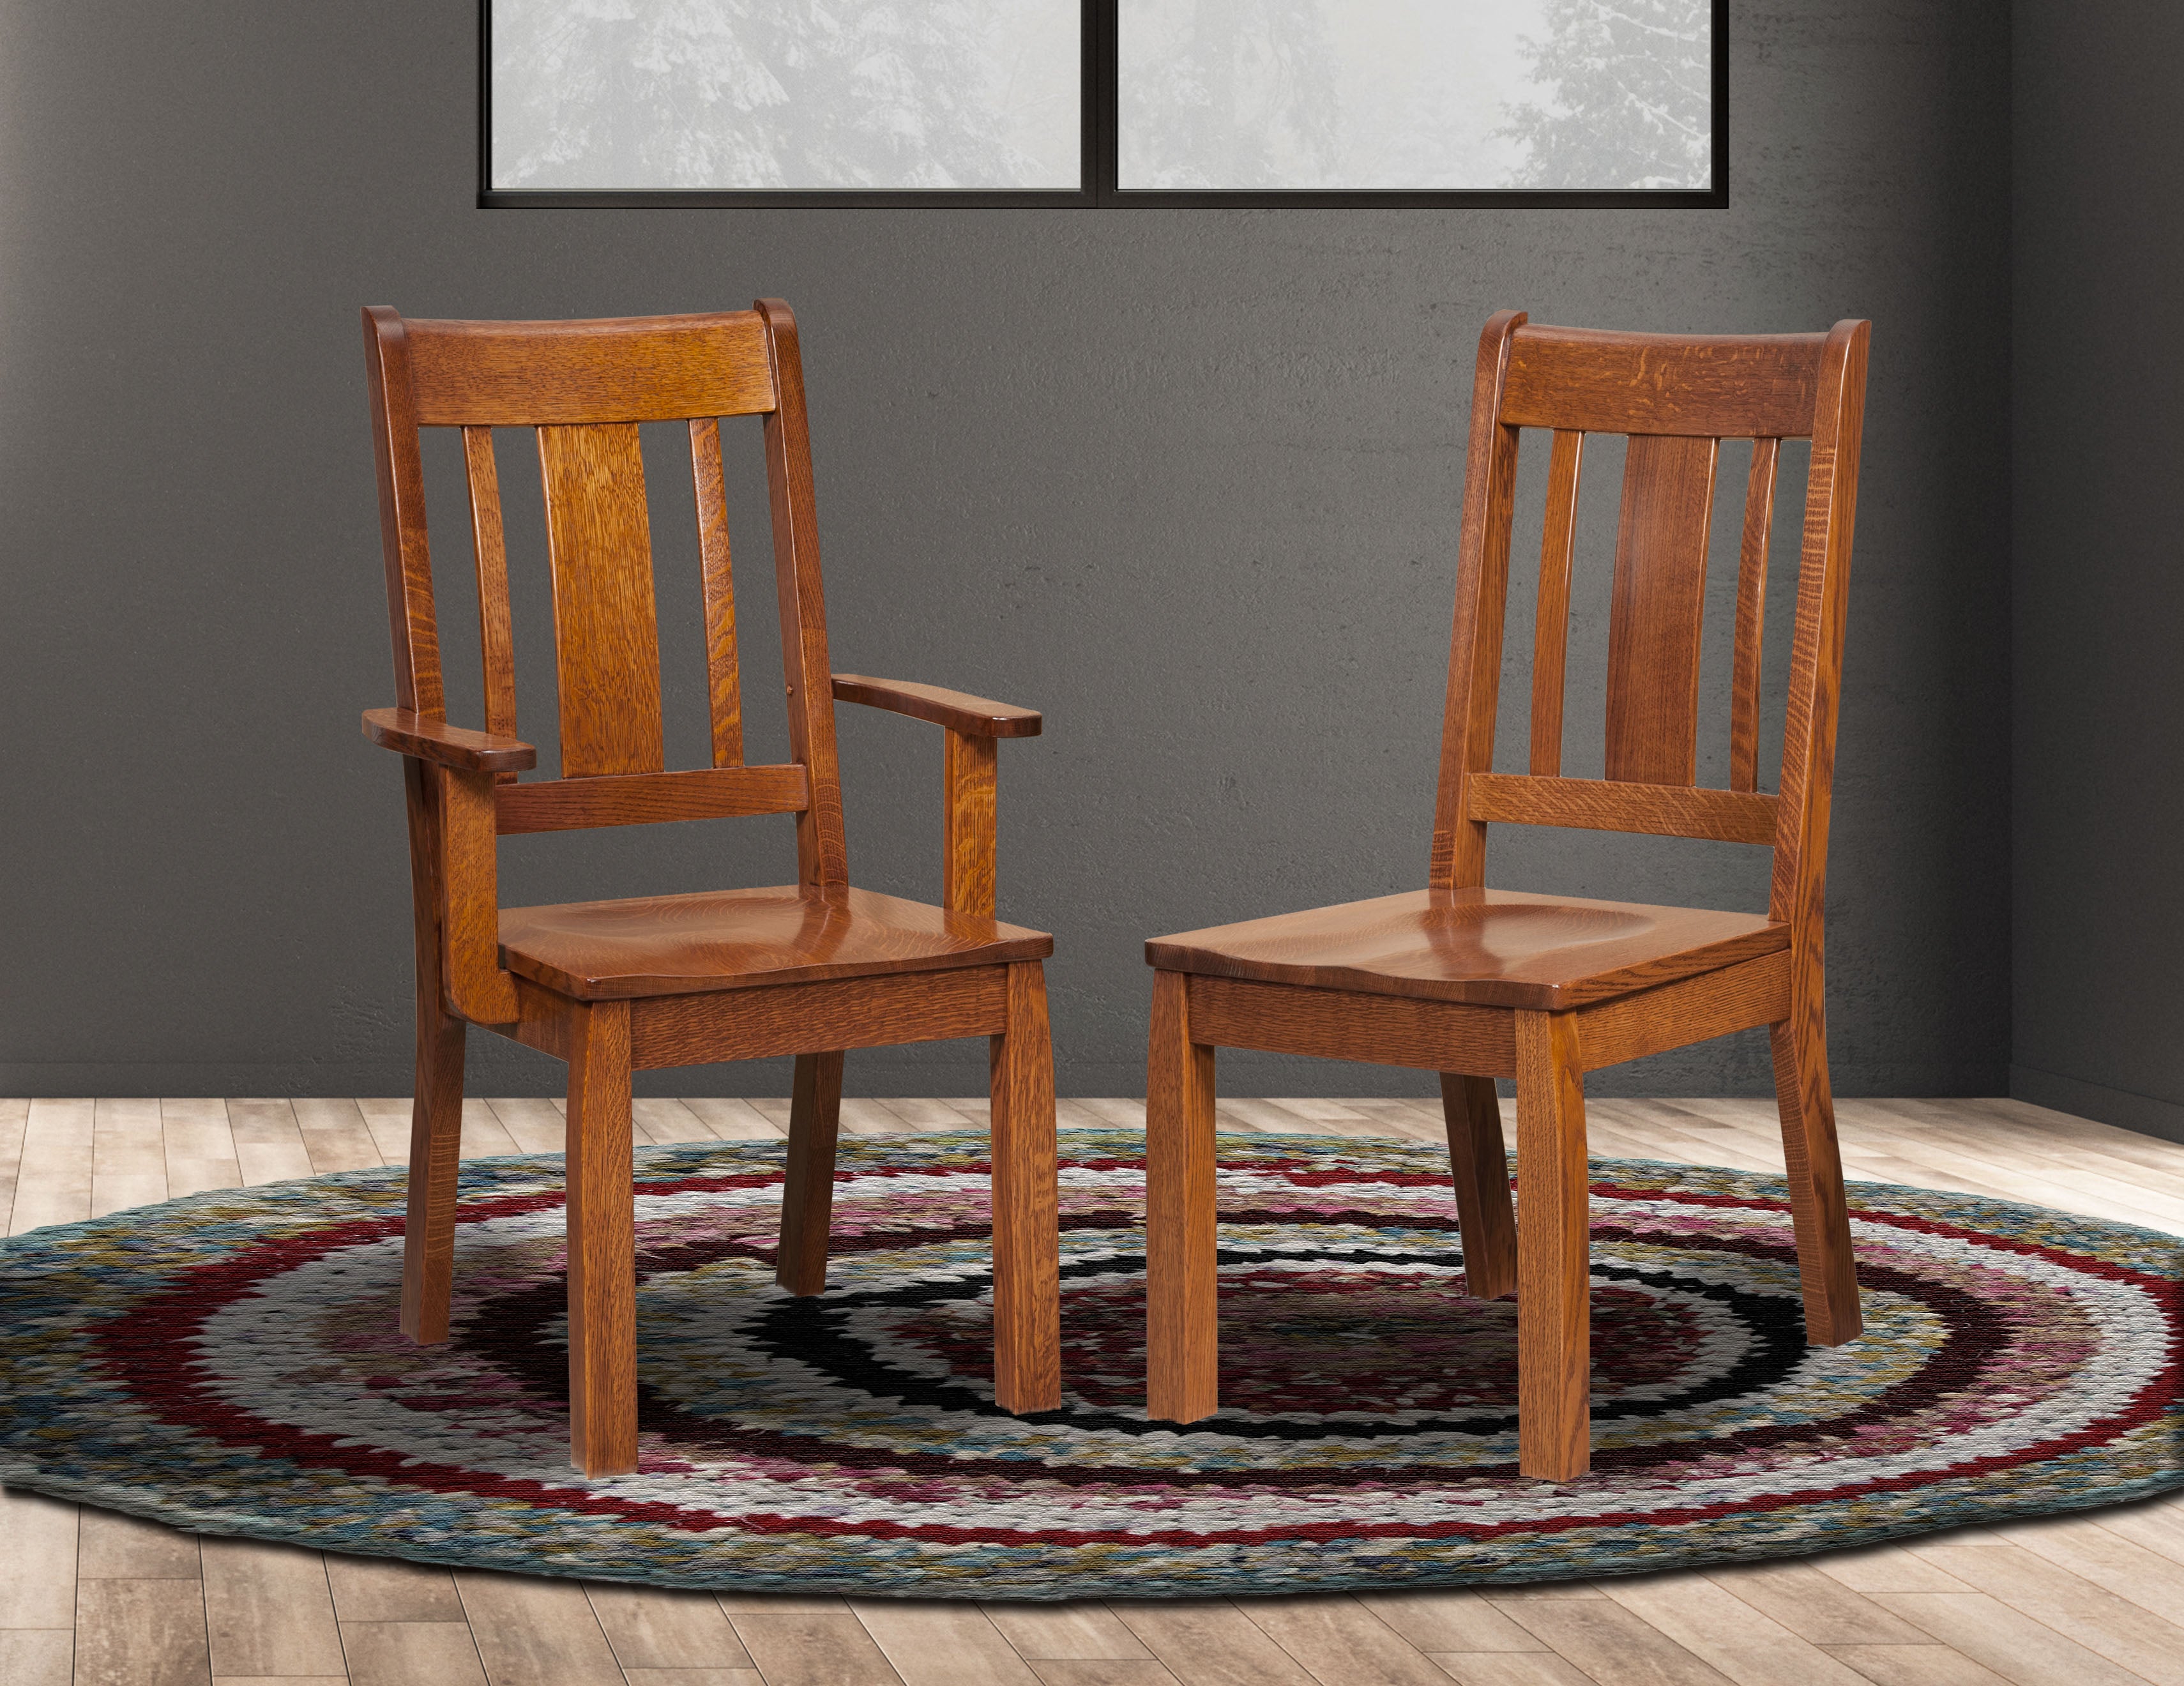 Amish Brookville Dining Chair